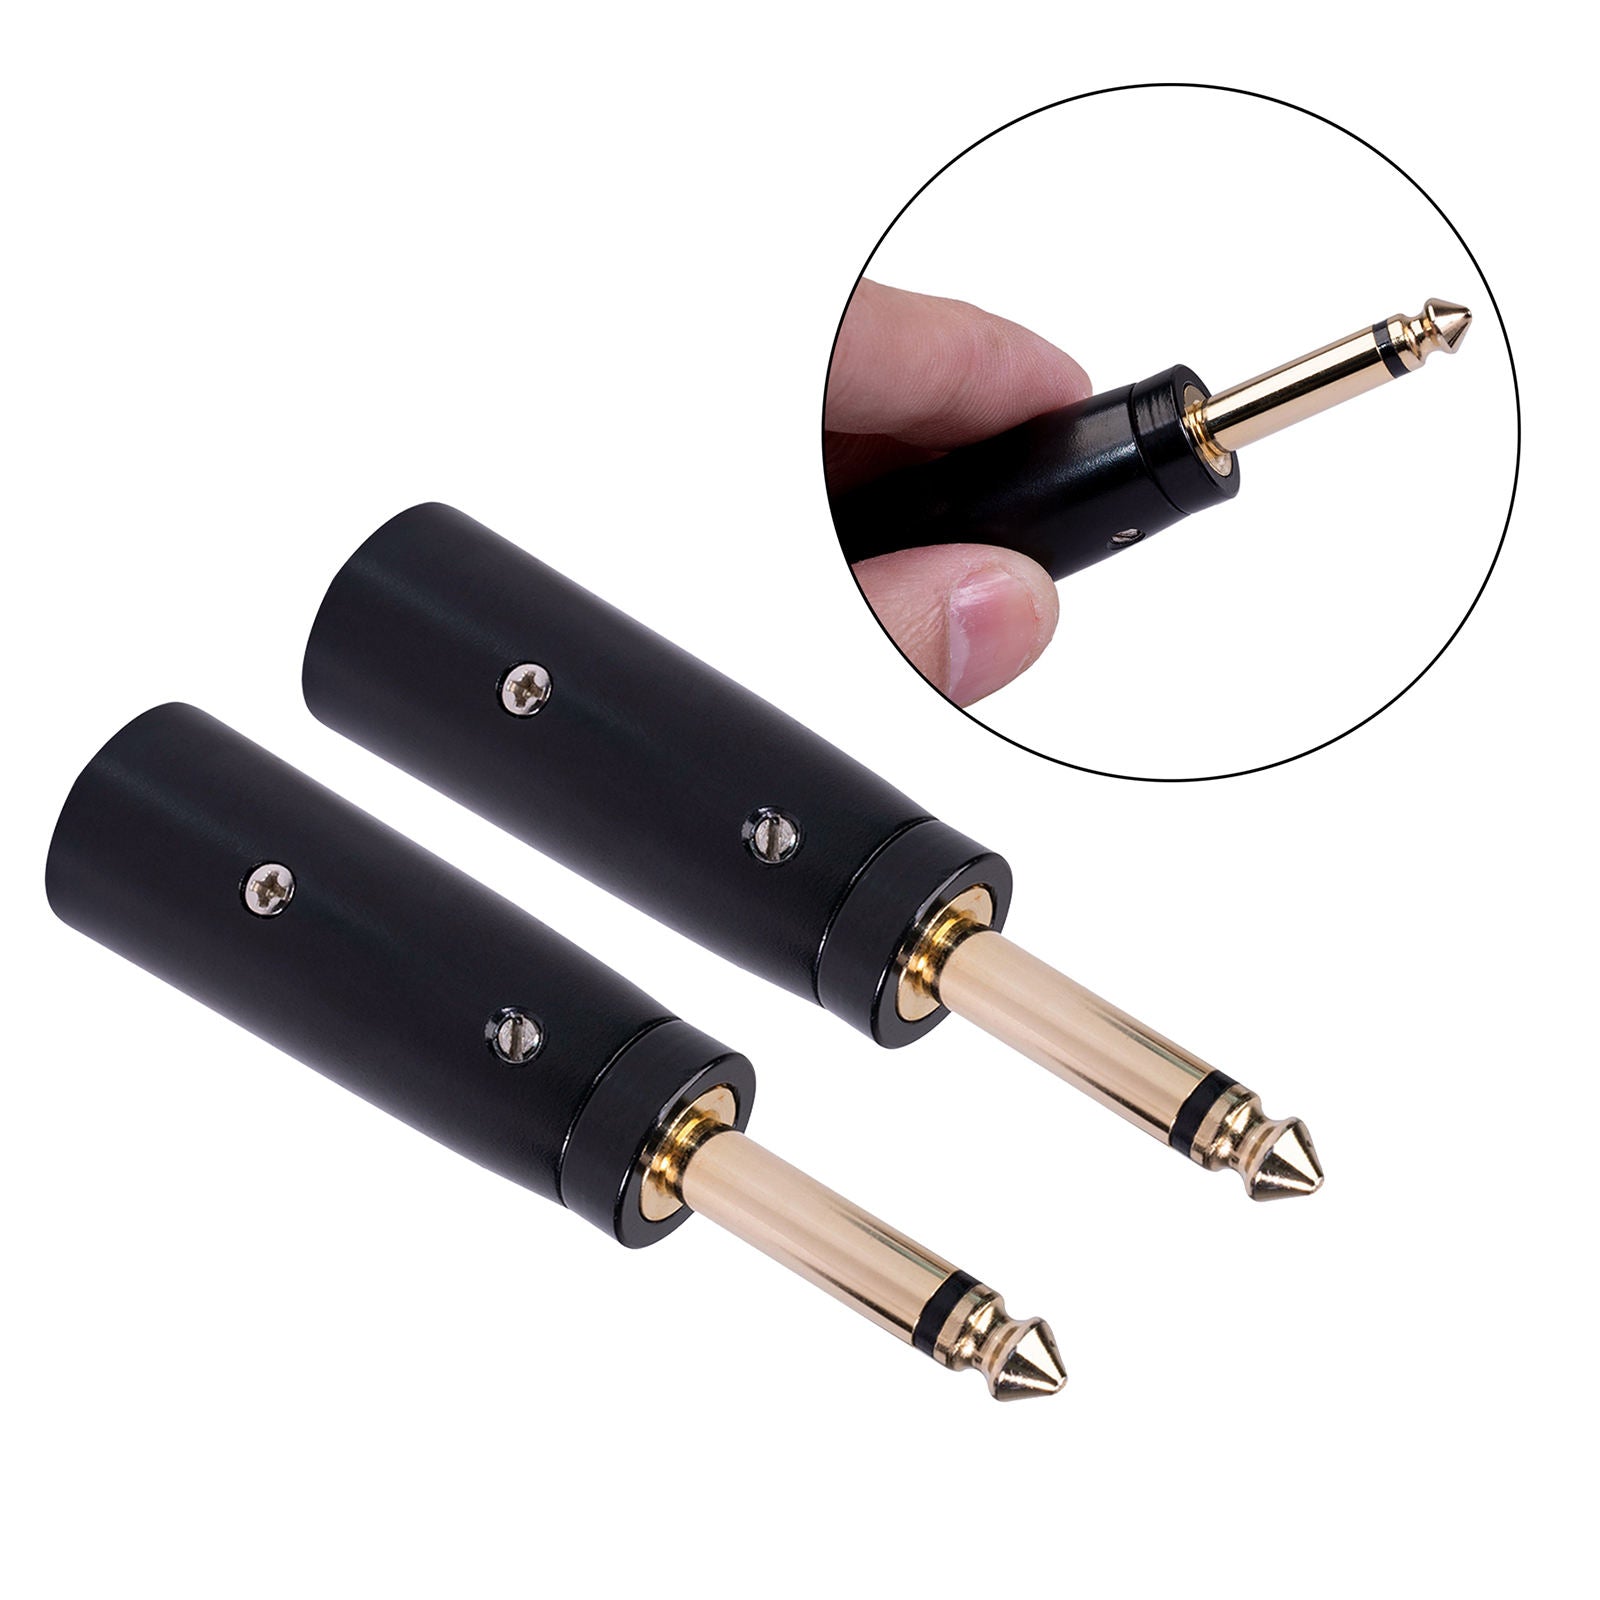 2x 3-Pin XLR Male TRS Socket Audio Mic Adapter Gender Changer Connector